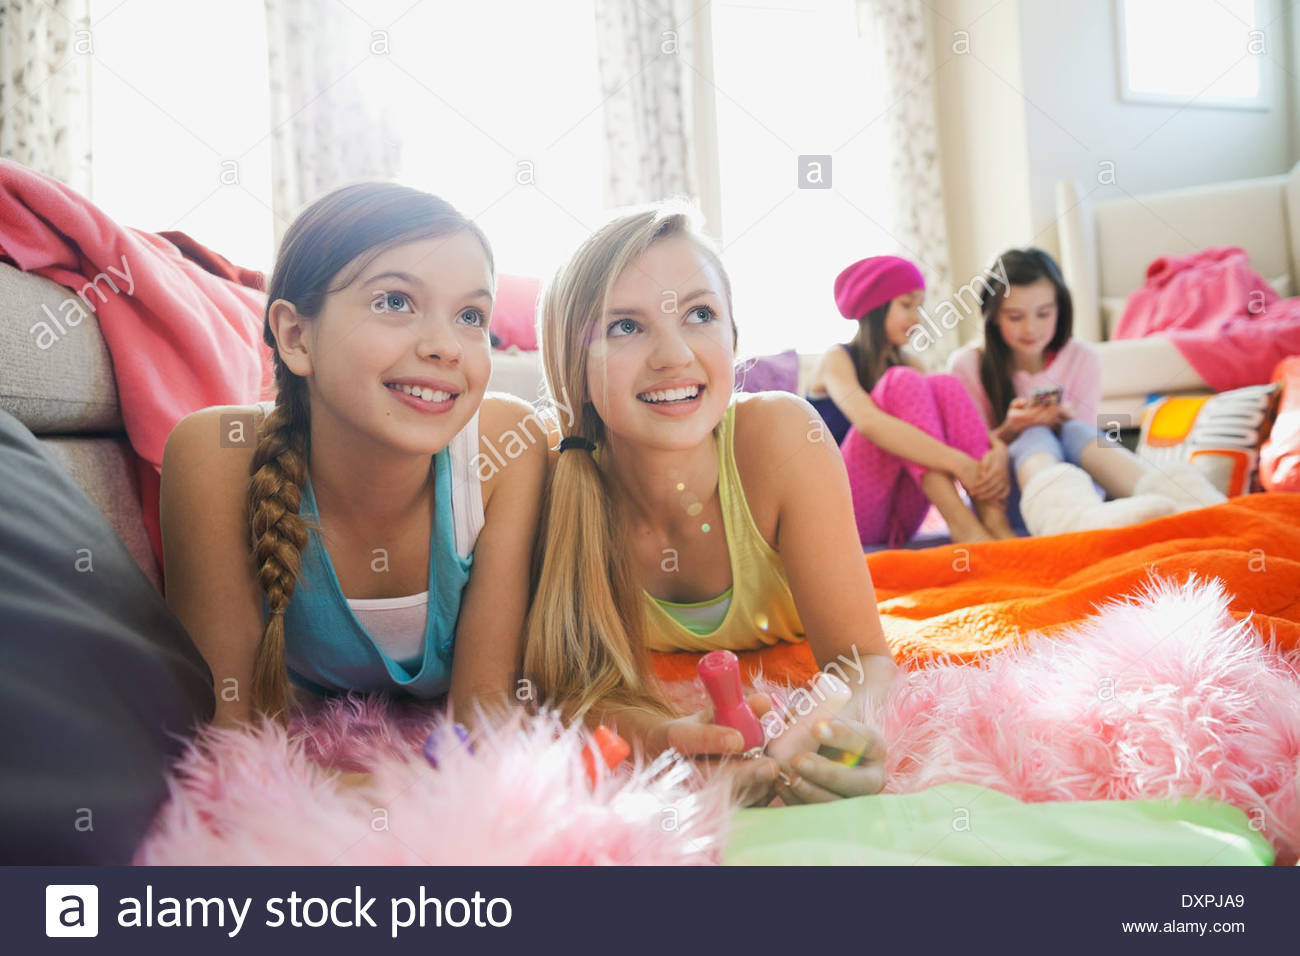 Girls hanging out at slumber party Banque D'Images